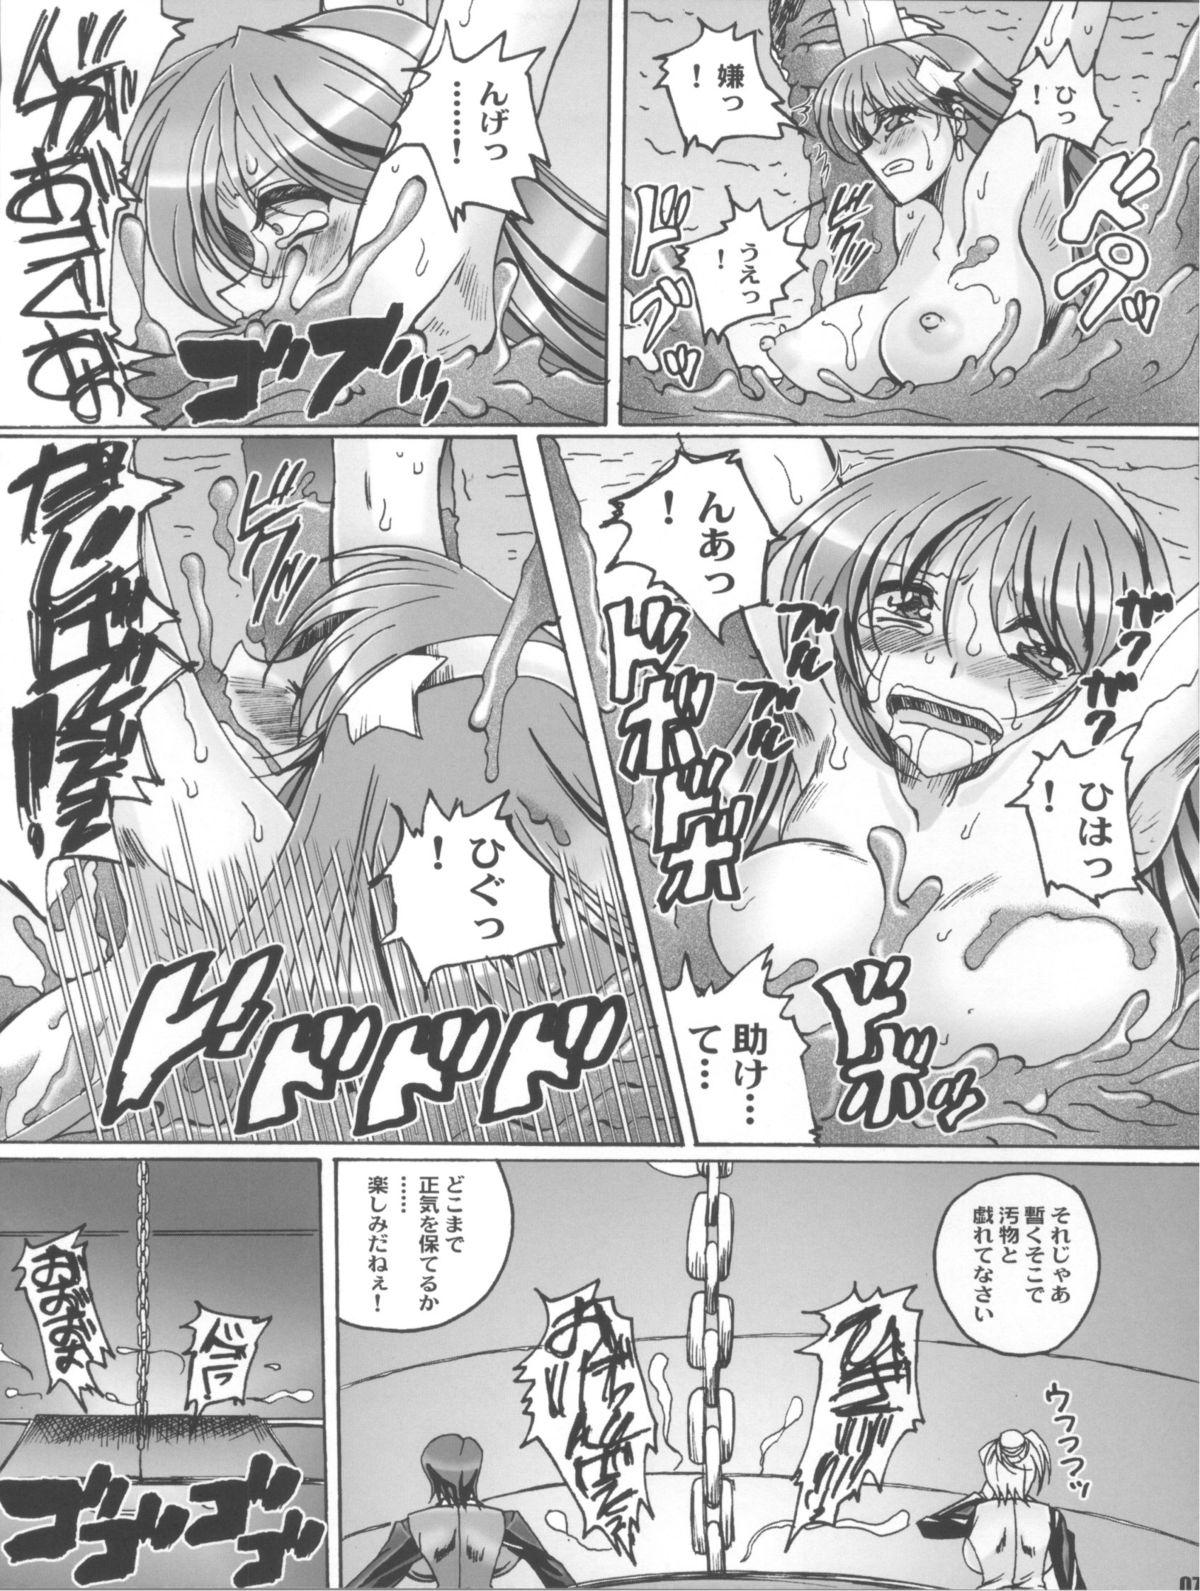 Seduction Porn Tokoton Athena - King of fighters Gaping - Page 7